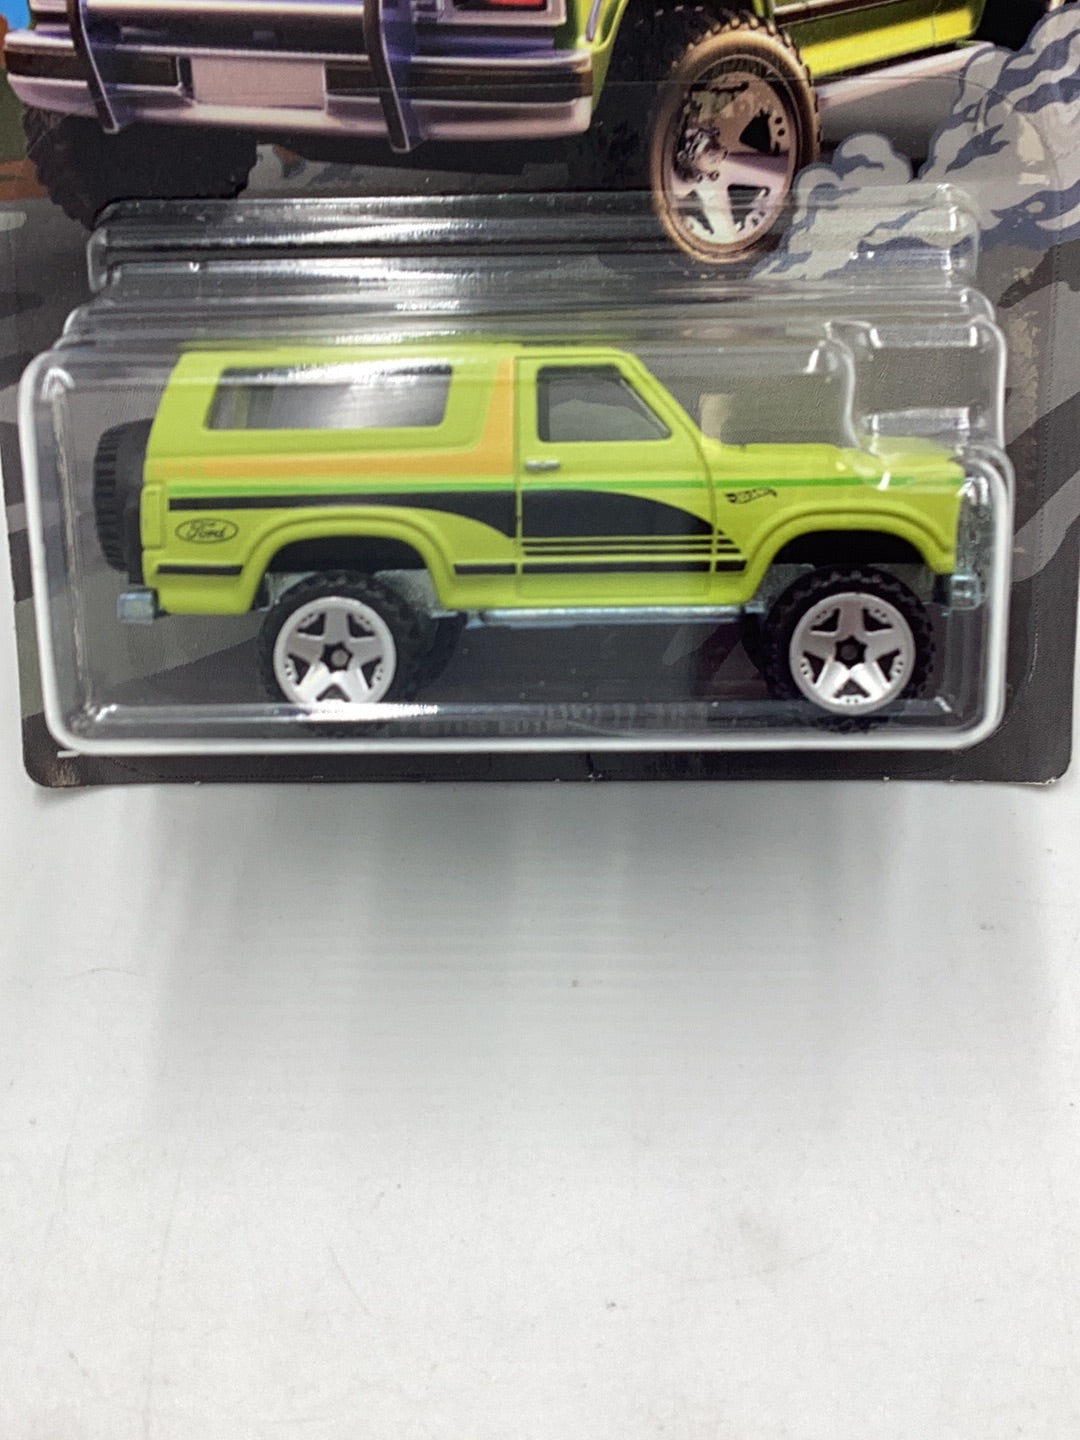 Hot wheels Ford Pickups 4/8 Ford Bronco 4x4 158C